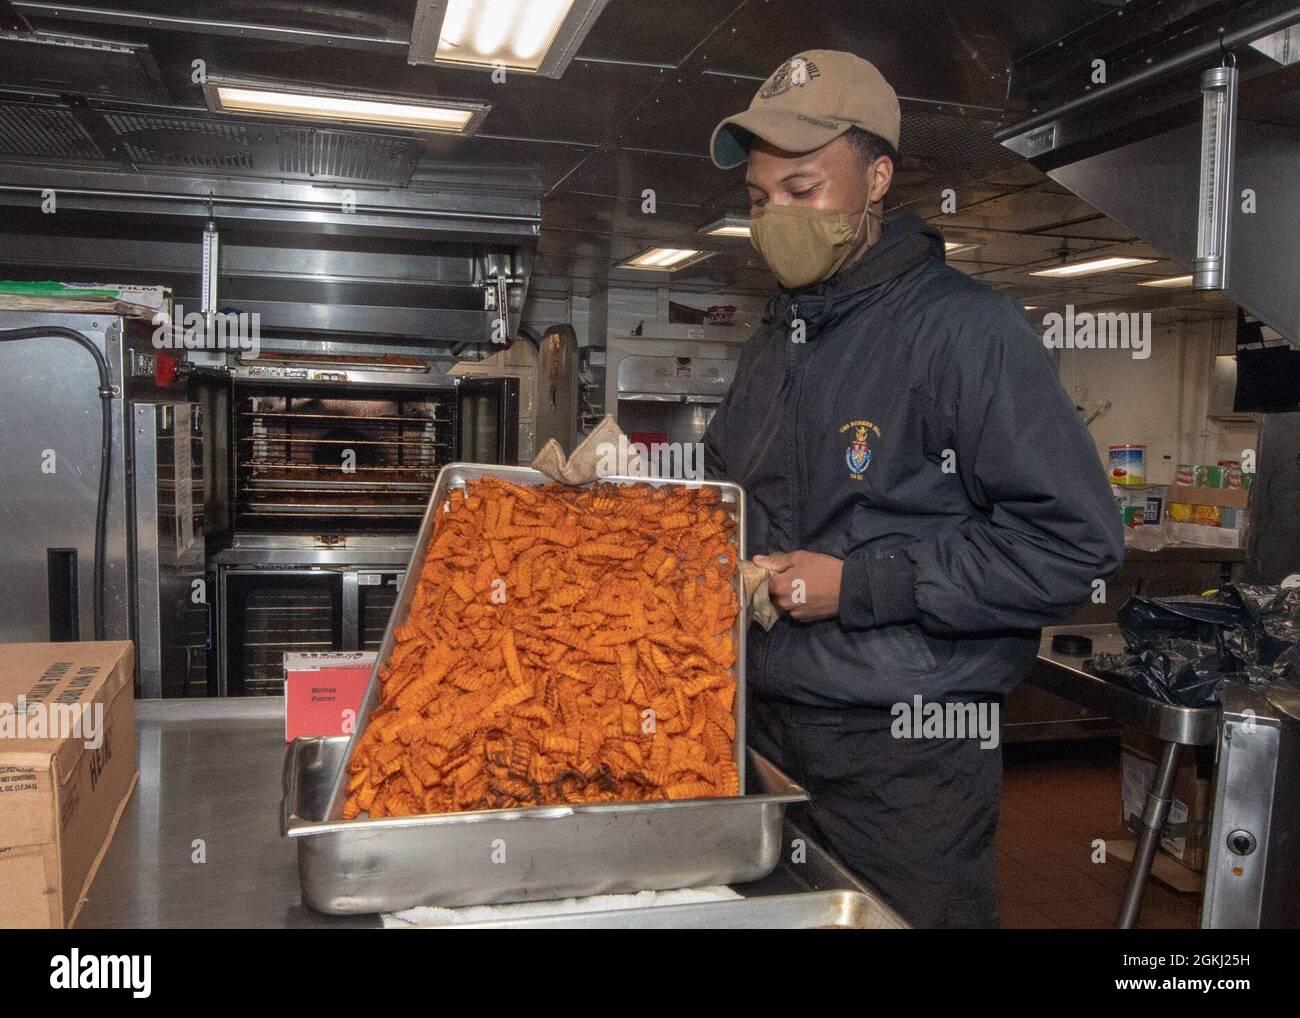 PACIFIC OCEAN (April 28, 2021) U.S. Navy Culinary Specialist Seaman Ethan Gardenhire, from Cleveland, puts sweet potato fries in a serving pan in the galley of the Ticonderoga-class guided-missile cruiser USS Bunker Hill (CG 52) April 28, 2021. Bunker Hill, part of the Theodore Roosevelt Carrier Strike Group, is on a scheduled deployment conducting routine operations in U.S. 3rd Fleet. Stock Photo